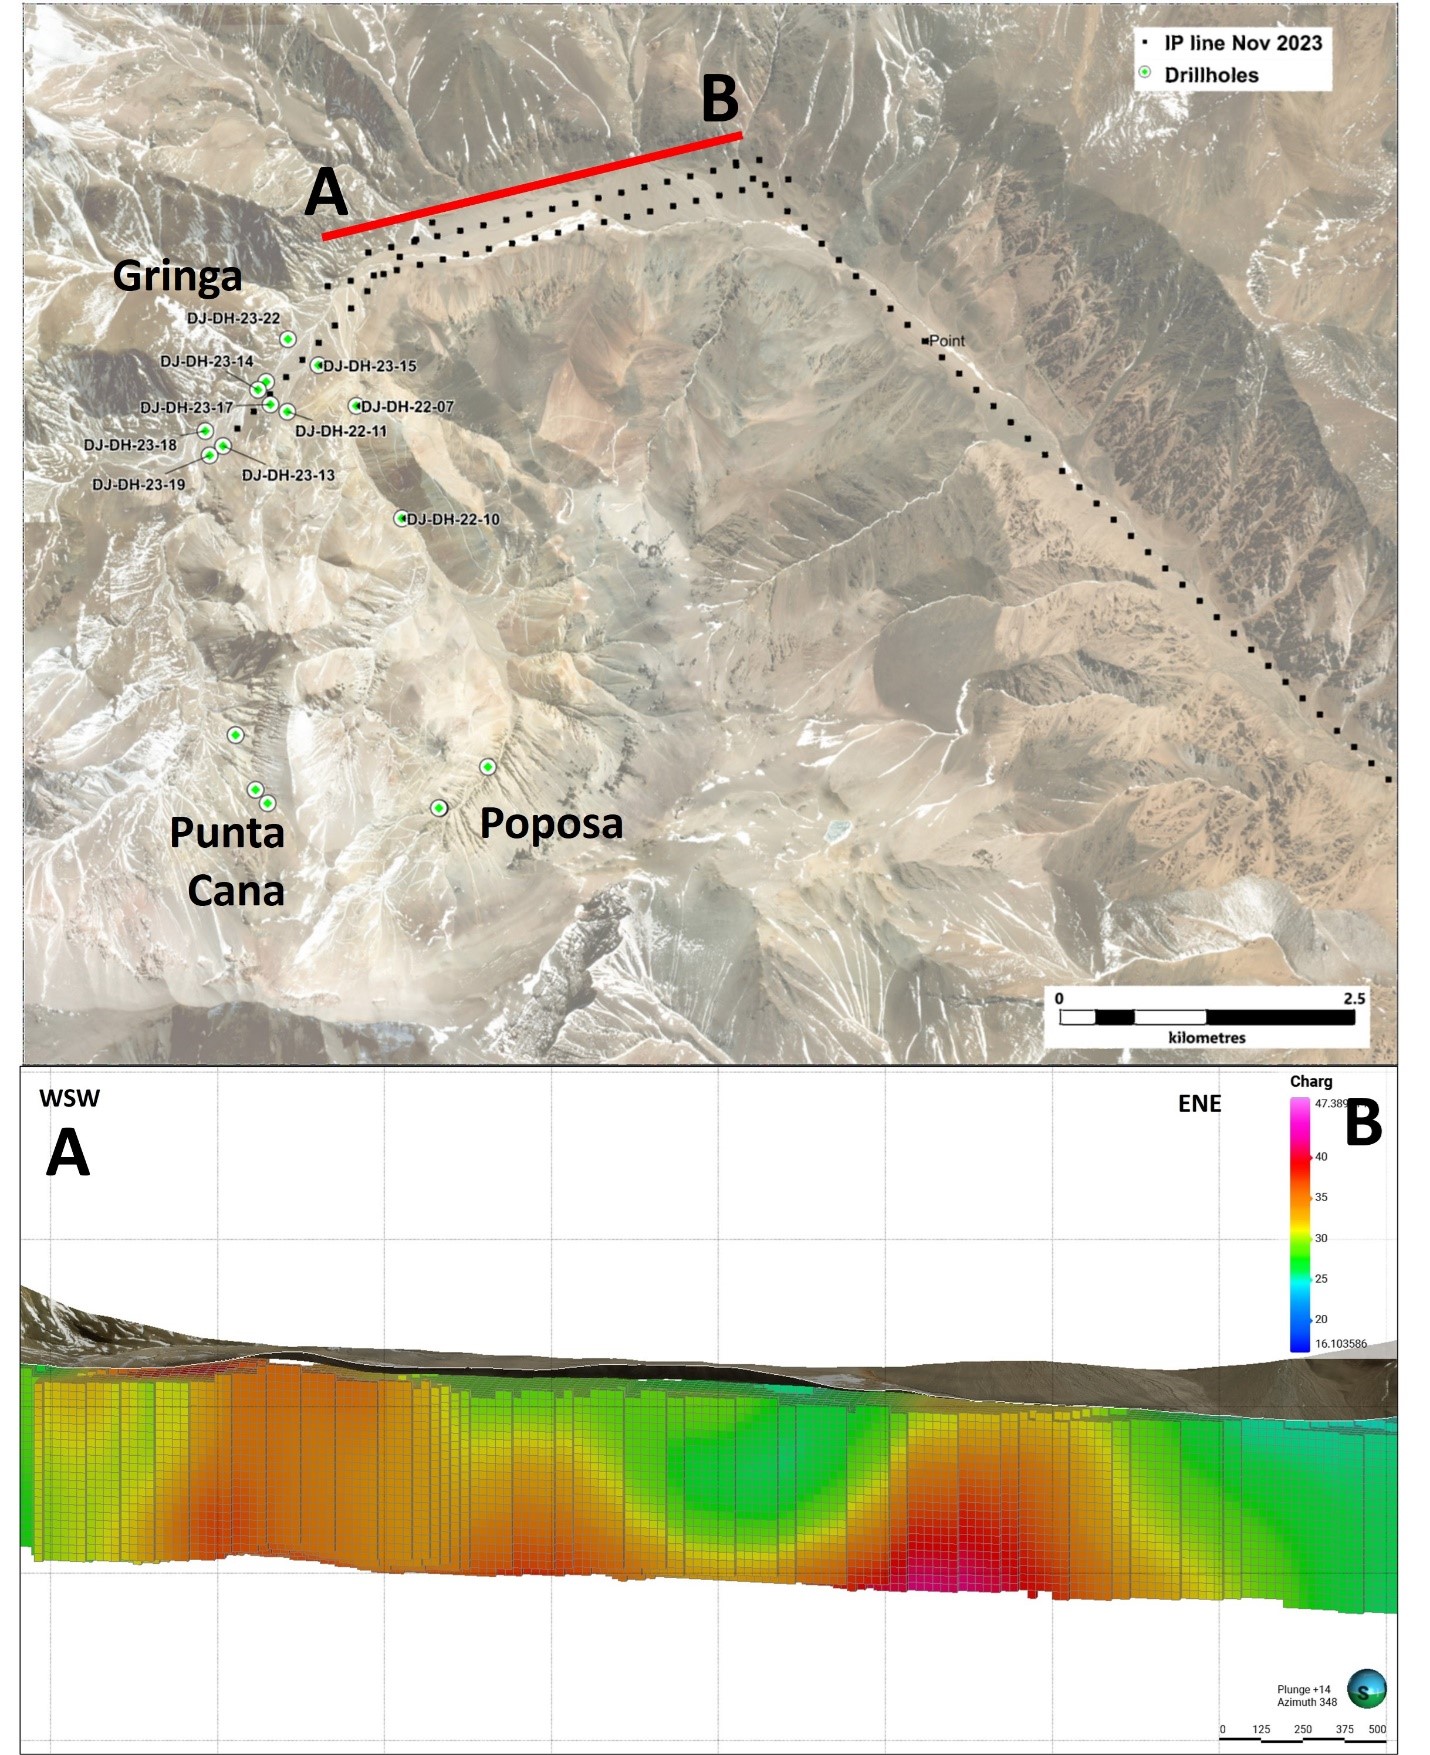 Location of IP lines acquired last month with respect to the Gringa and Poposa porphyry targets. The lower section shows the geometry and intensity of the two new IP anomalies.